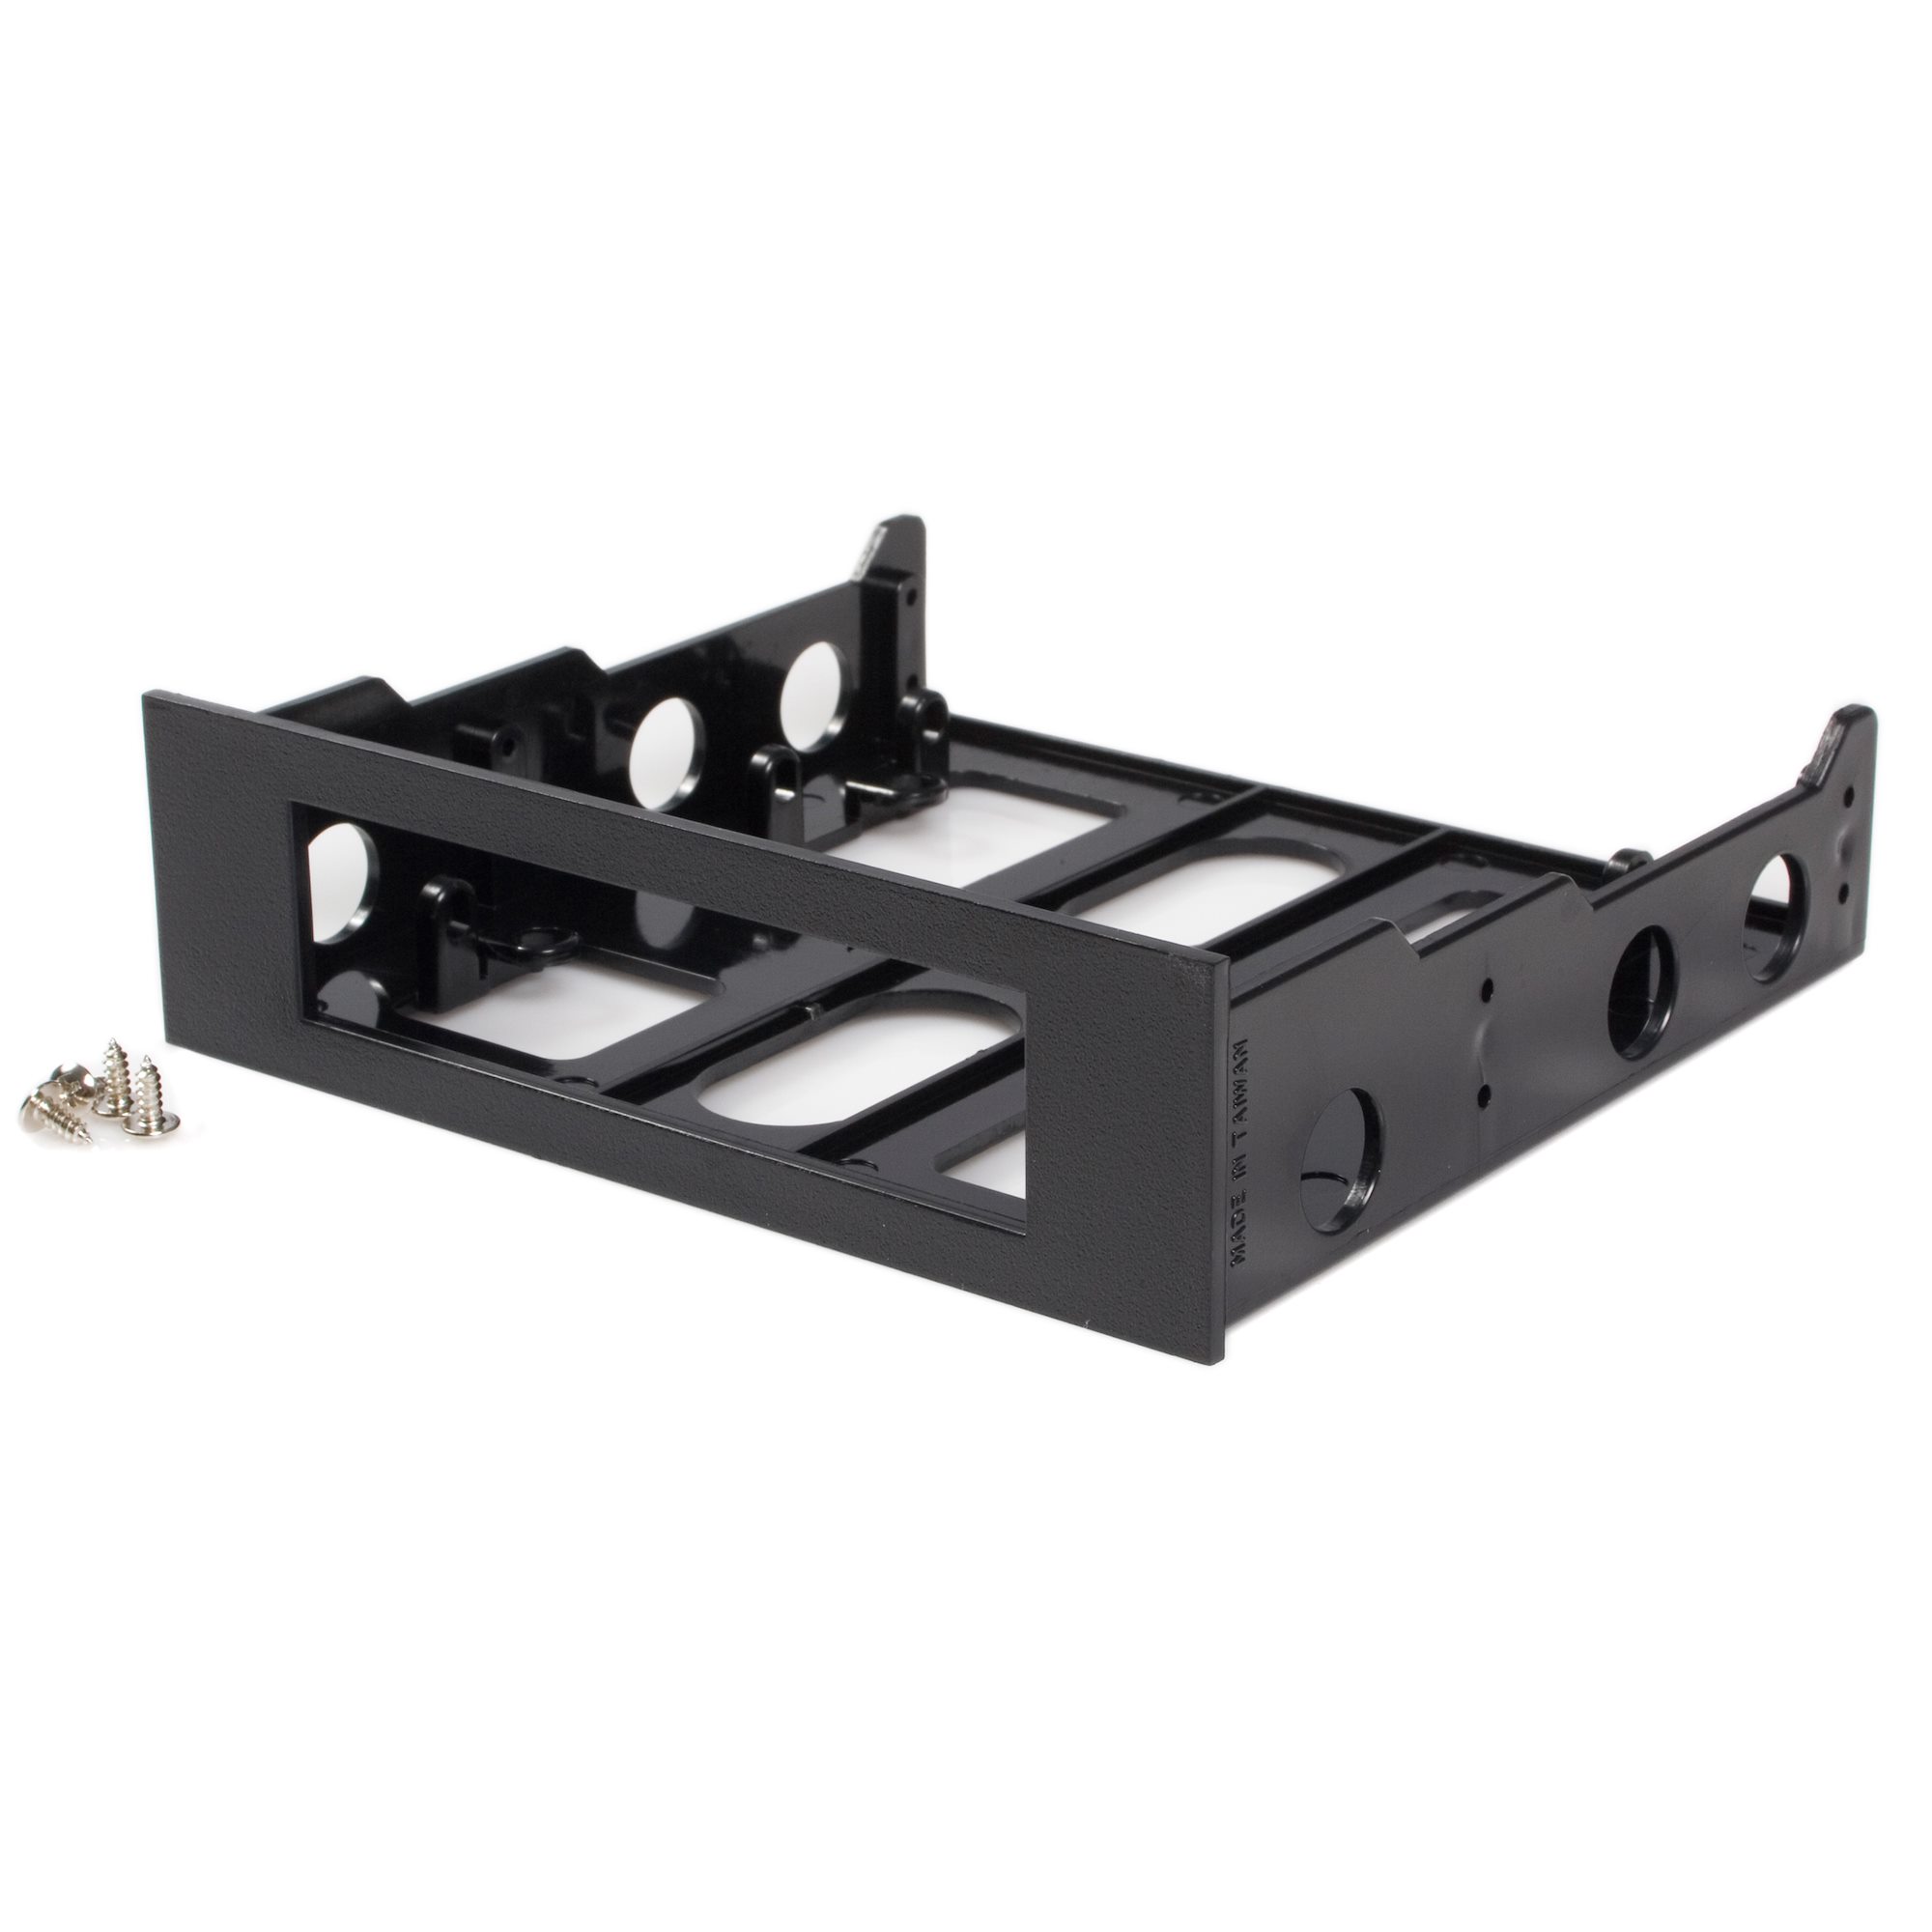 Mounting Bracket, 3.5 to 5.25 Front Bay - Drive Mounting Brackets &  Accessories, Hard Drive Accessories